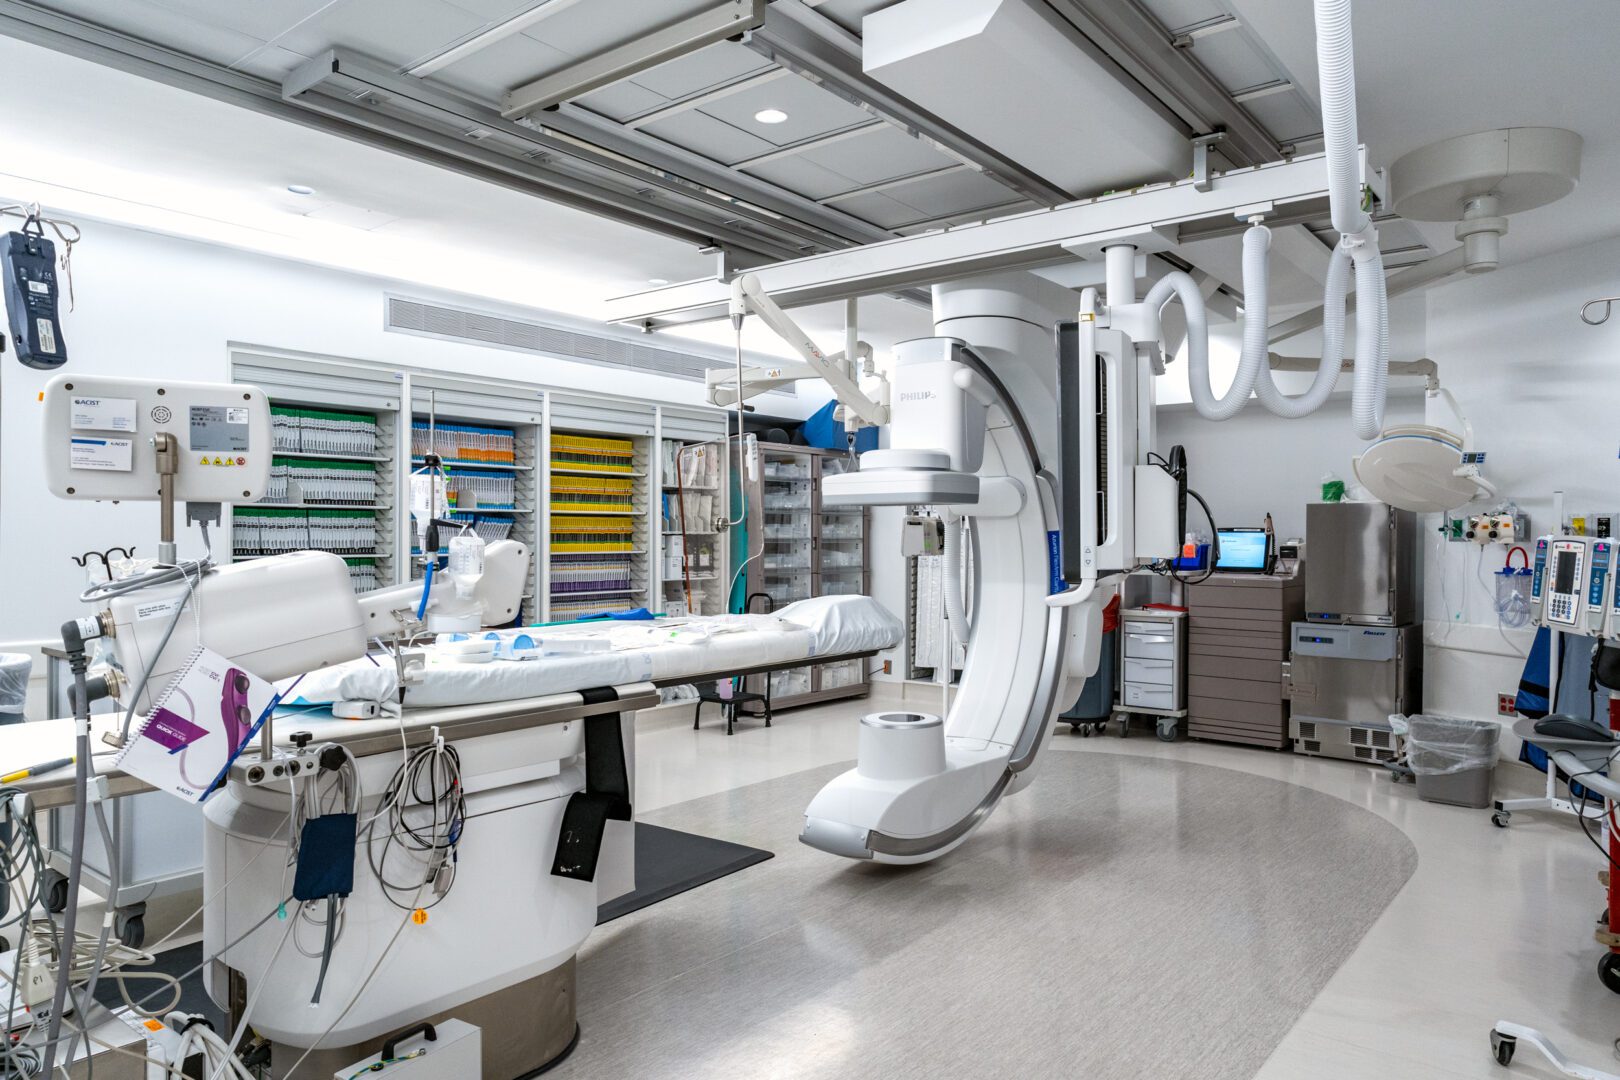 An operation room with health equipment